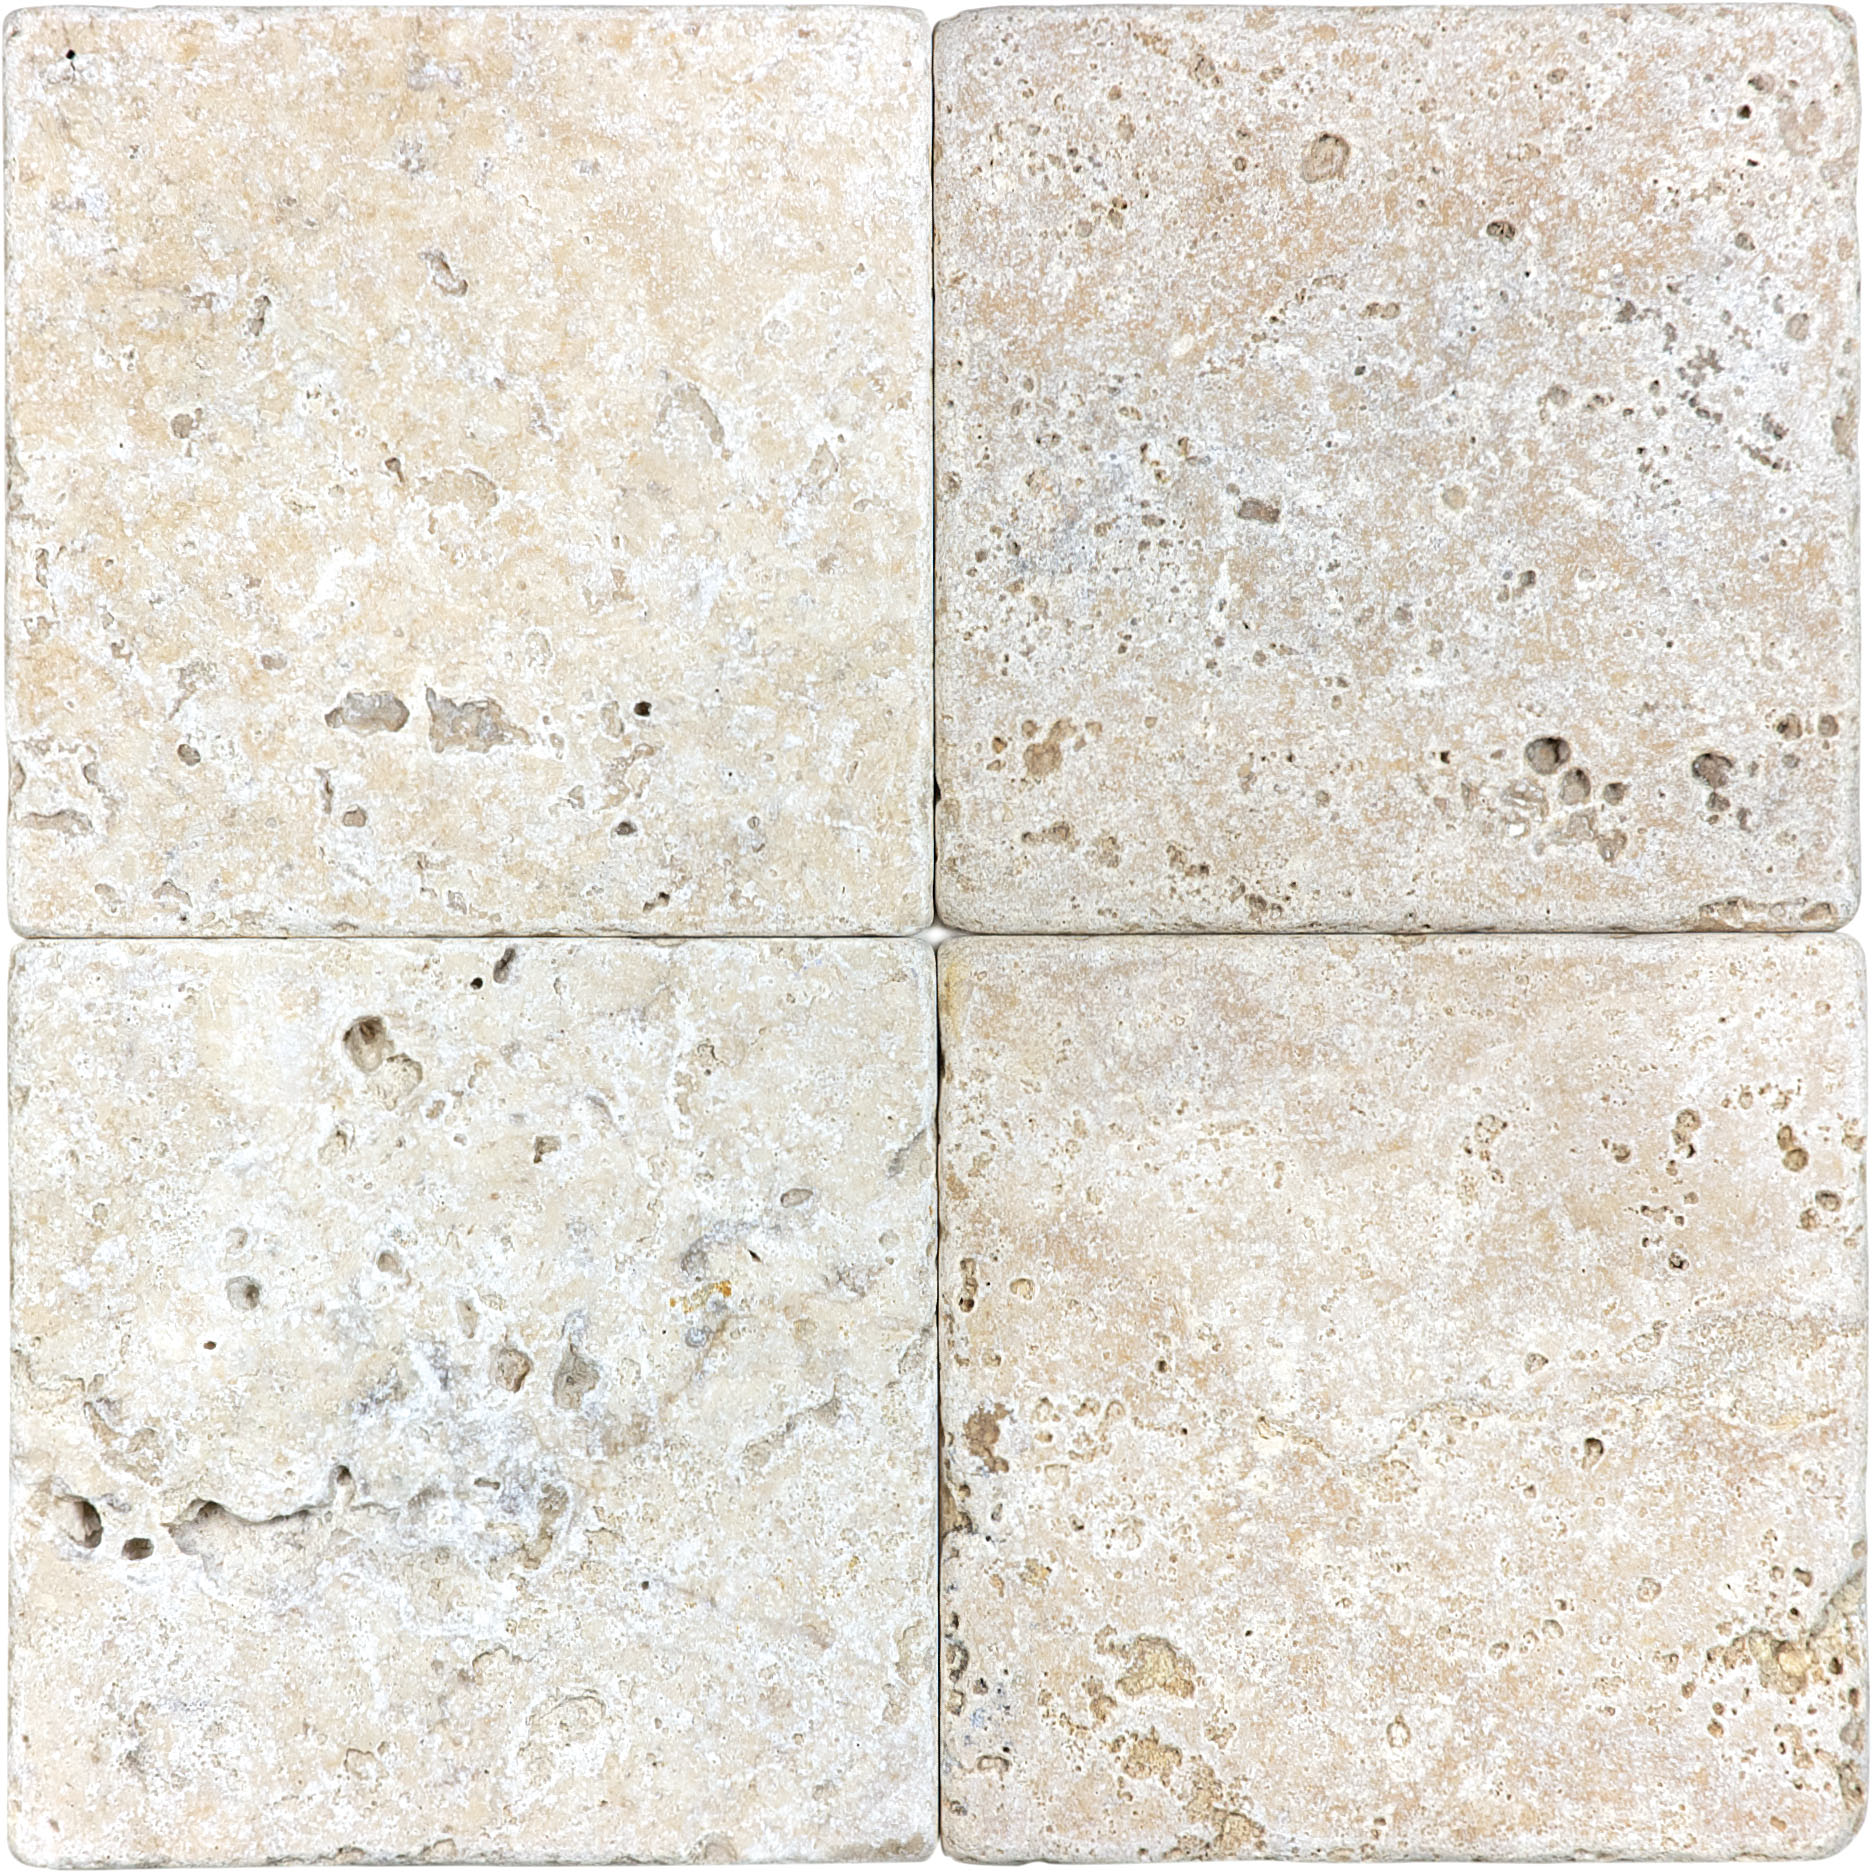 travertine pattern natural stone field tile from picasso anatolia collection distributed by surface group international tumbled finish tumbled edge 6x6 square shape